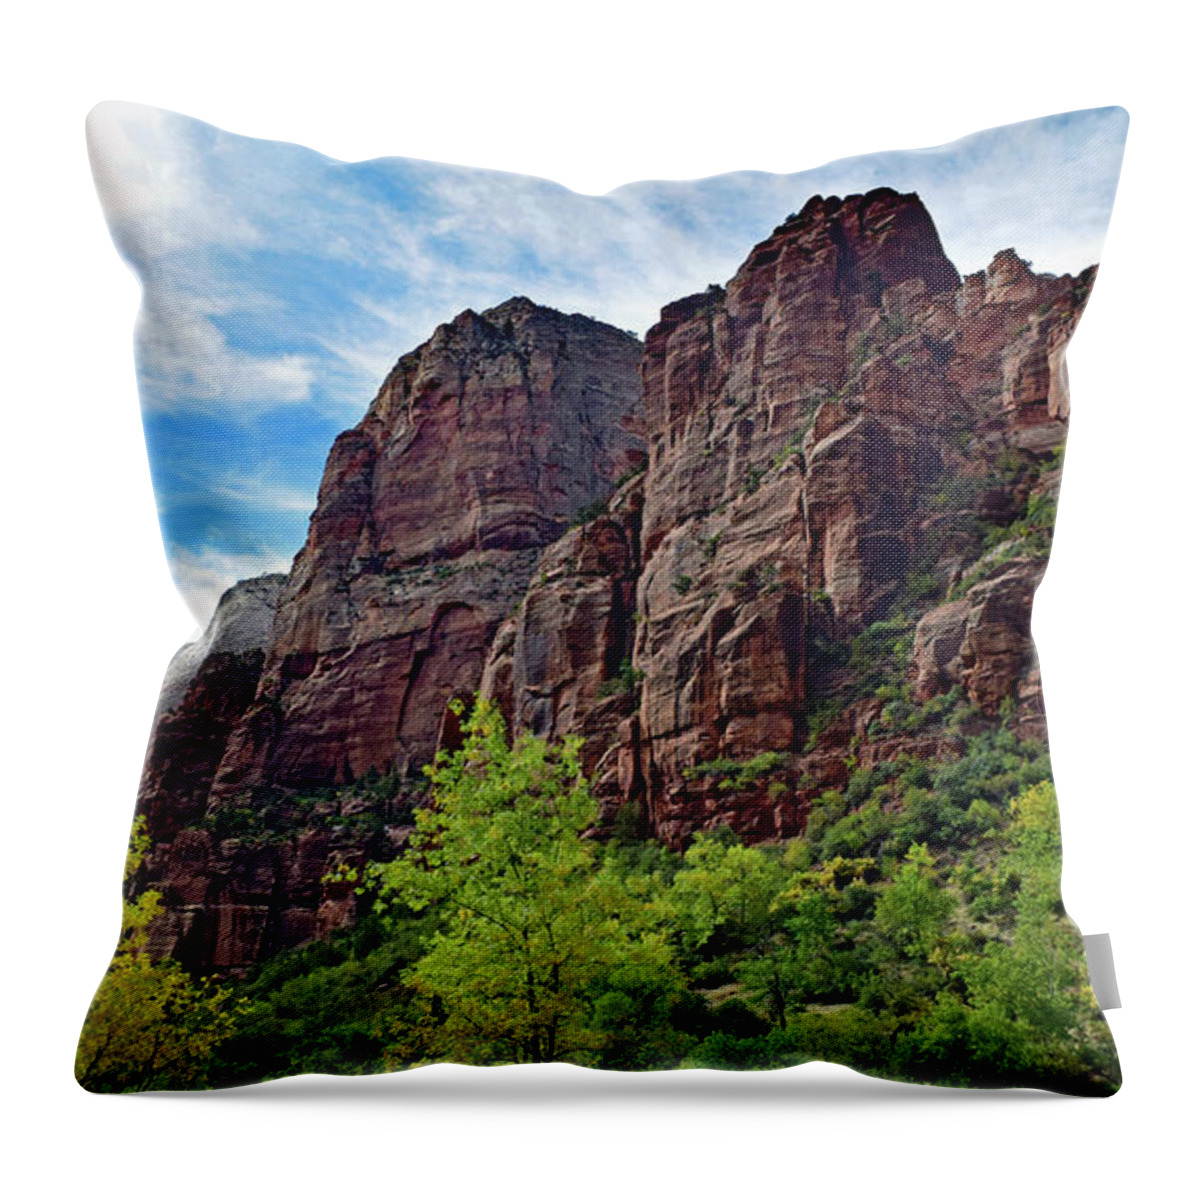 Zion Throw Pillow featuring the photograph Zion No. 67-1 by Sandy Taylor